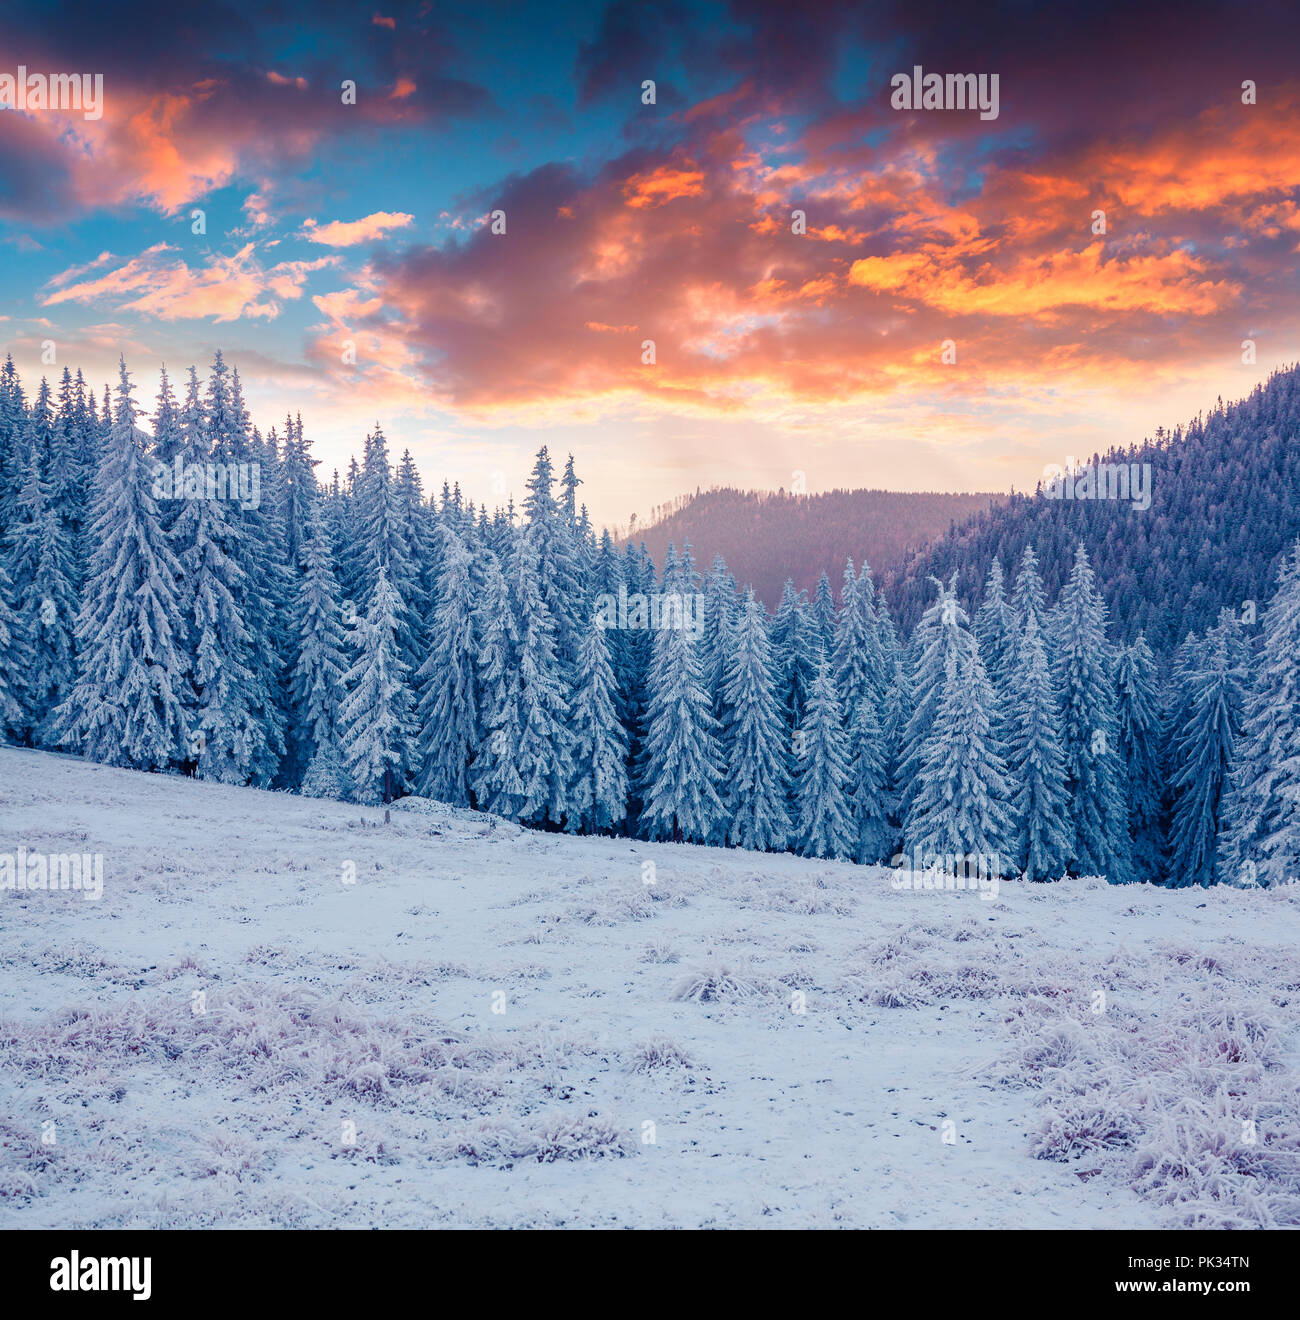 Colorful landscape at the winter sunrise in the mountain forest Stock Photo